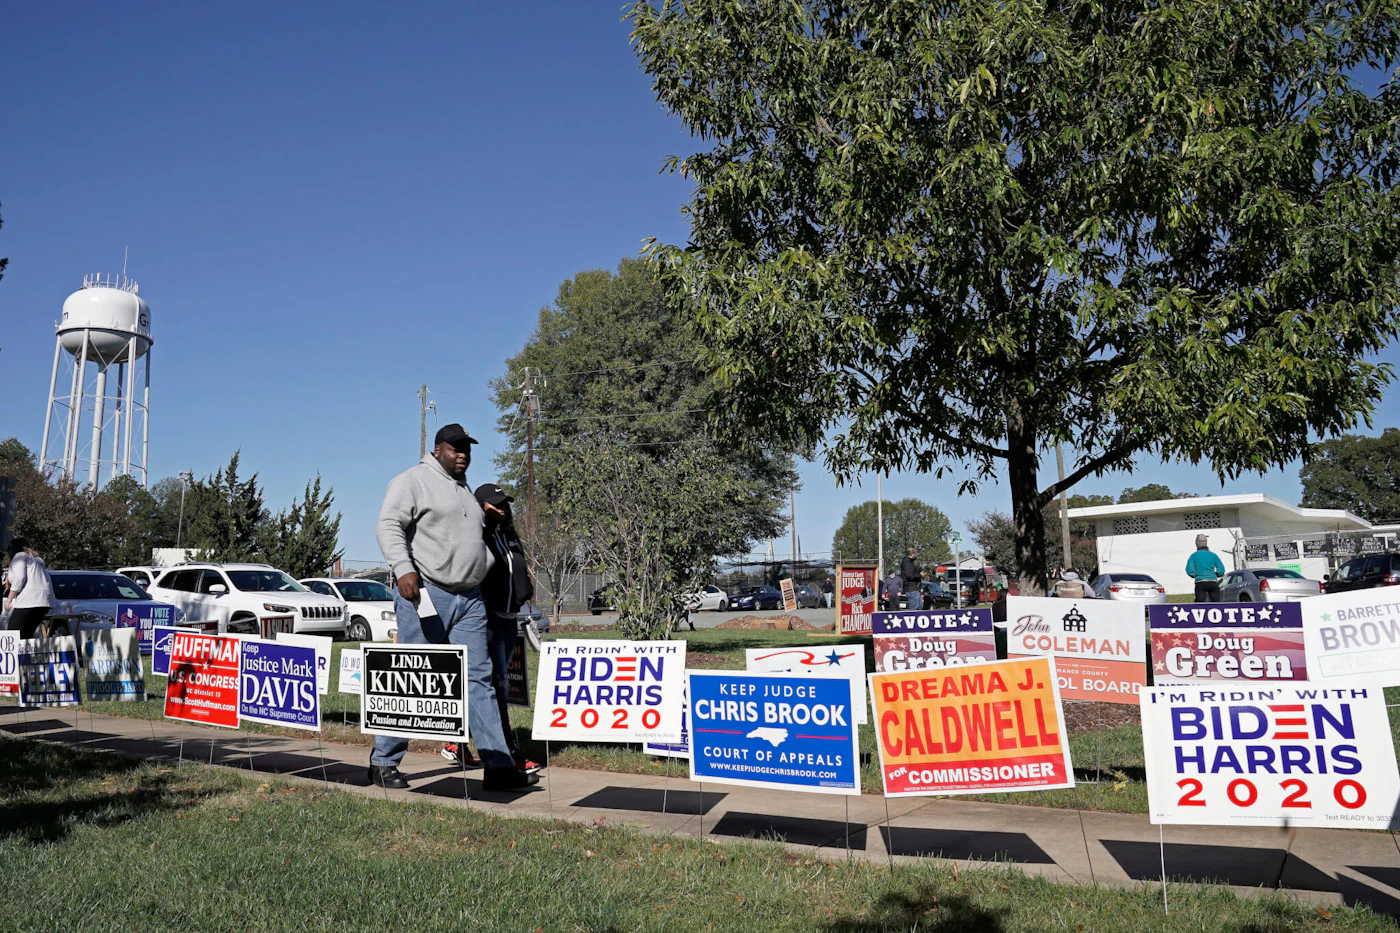 Voters walk past campaign signs at the Graham Civic Center polling location in Graham, N.C., Tuesday, Nov. 3, 2020. (AP Photo/Gerry Broome)